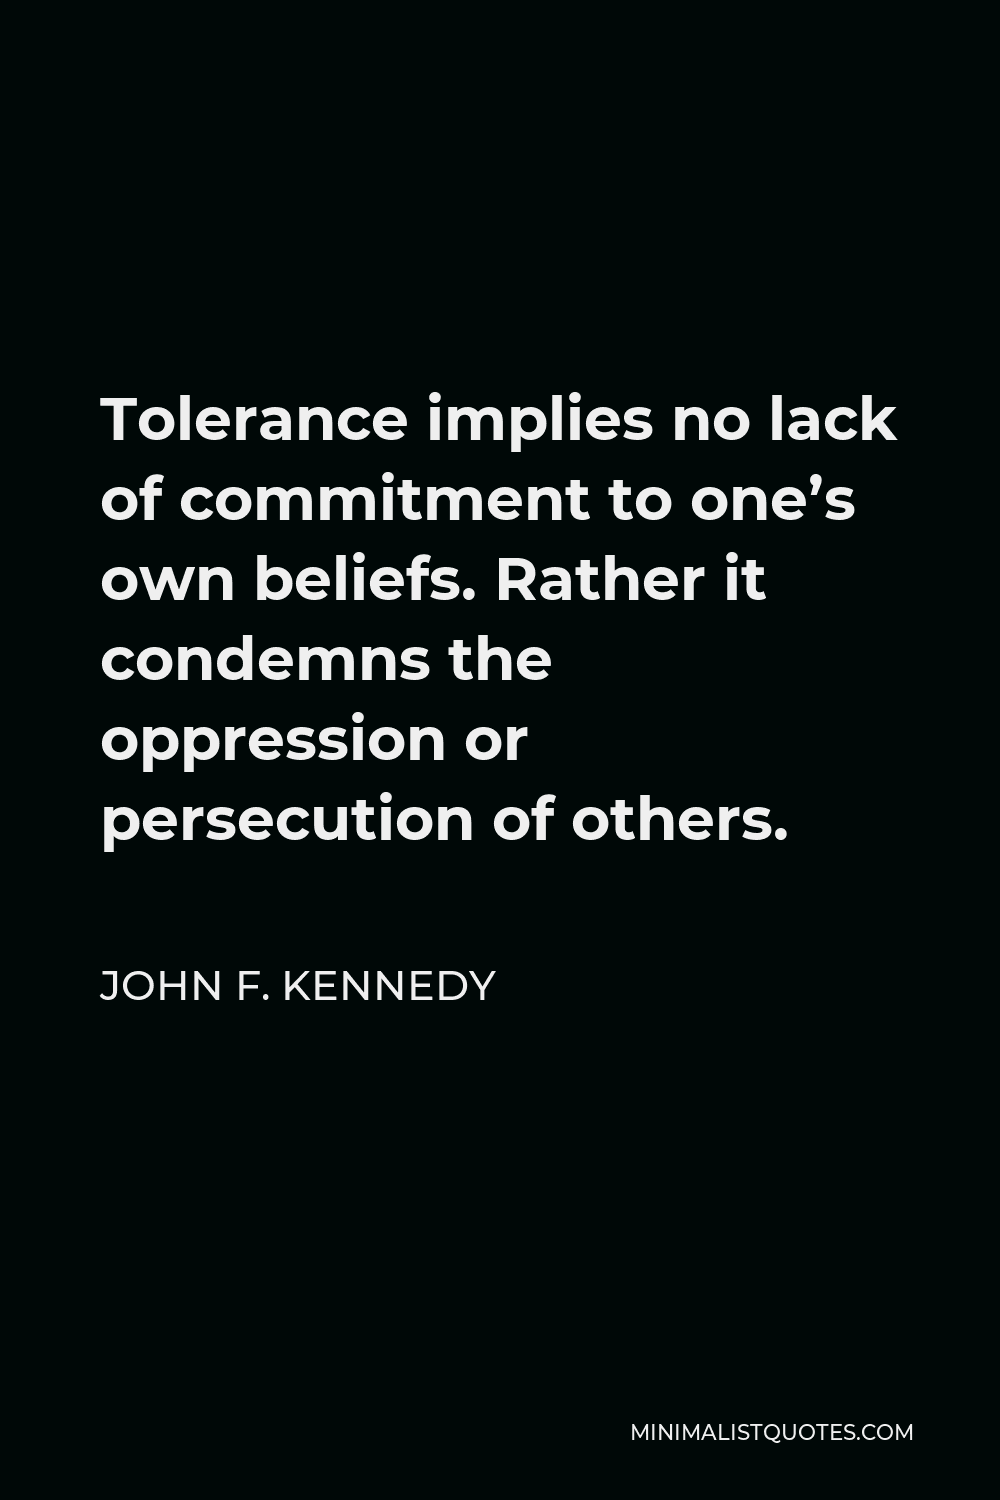 John F. Kennedy Quote - Tolerance implies no lack of commitment to one’s own beliefs. Rather it condemns the oppression or persecution of others.